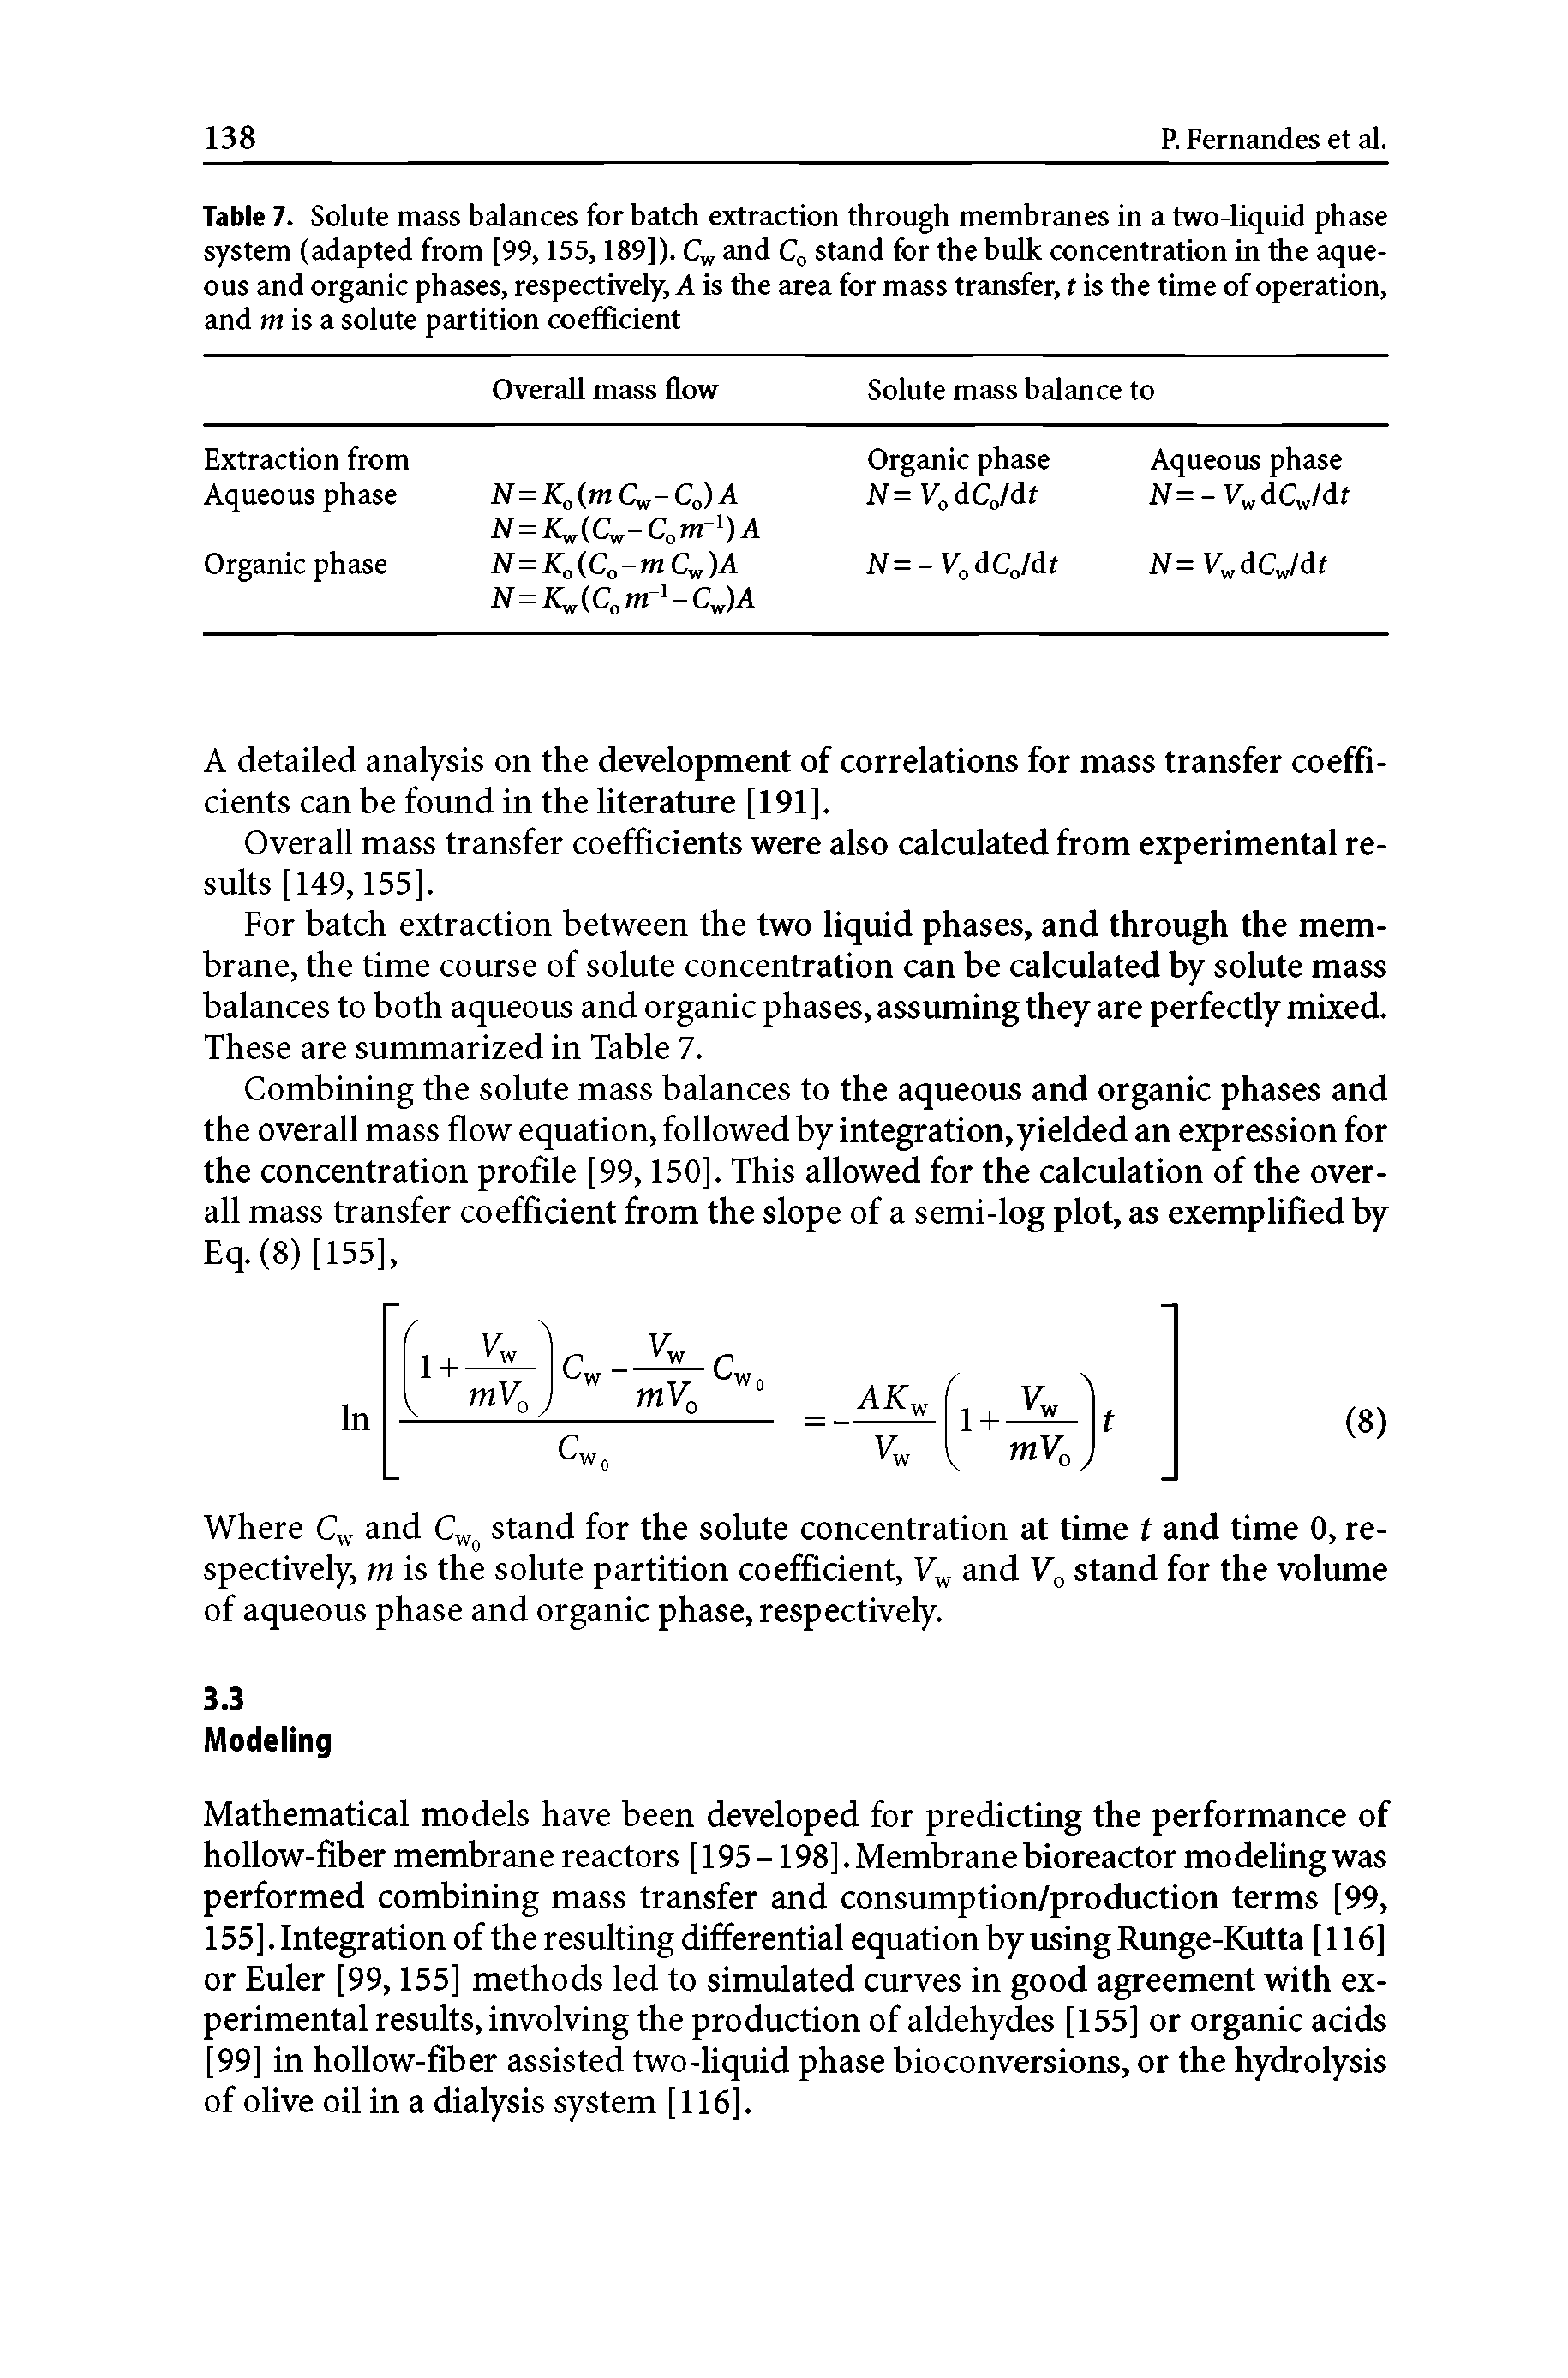 Table 7. Solute mass balances for batch extraction through membranes in a two-Uquid phase system (adapted from [99,155,189]). Cy, and C stand for the hulk concentration in the aqueous and organic phases, respectively, A is the area for mass transfer, t is the time of operation, and m is a solute partition coefficient...